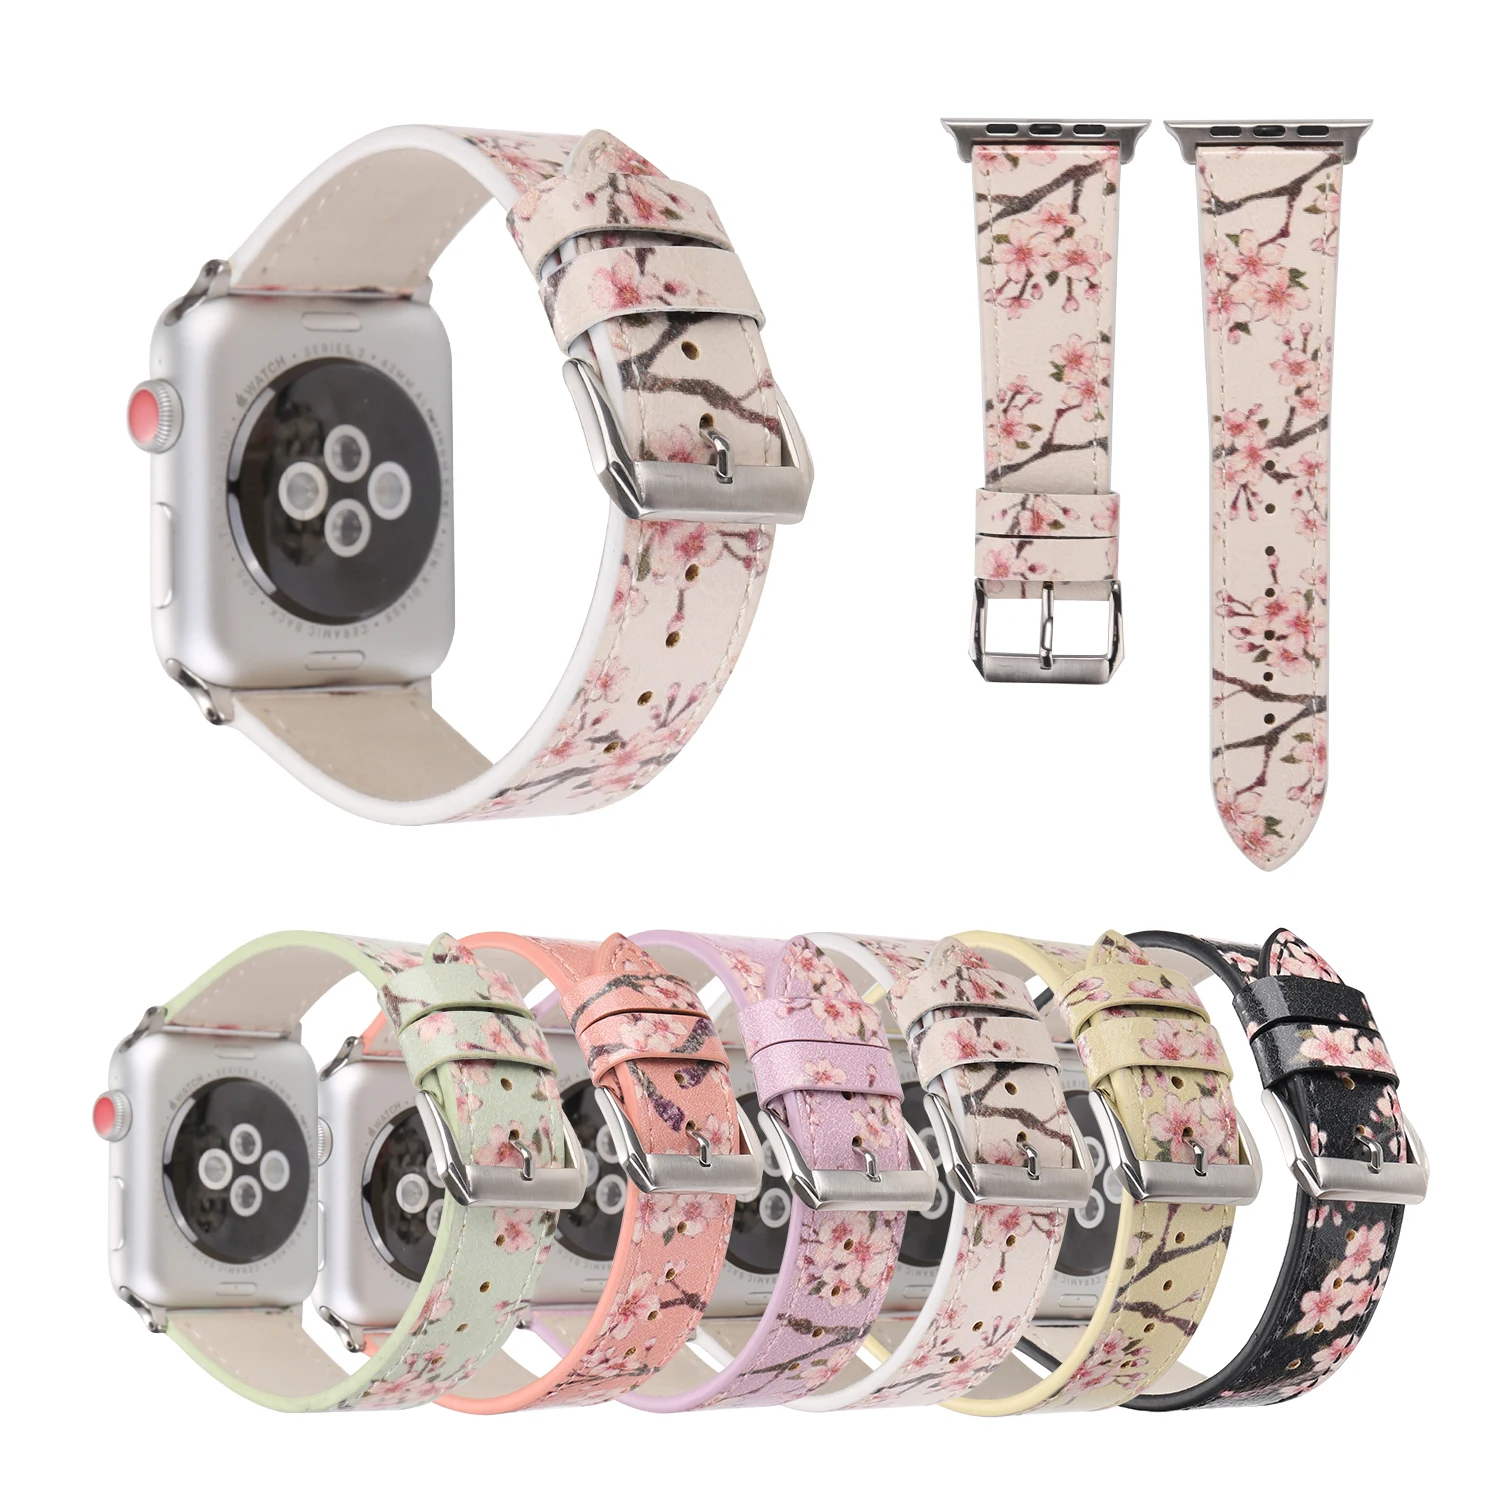 Flower Prints Leather Watch Band for Apple Watch 38/42mm 40/44mm Bracelet Cherry Blossoms Band for iWatch Series SE 6 5 4 3 2 1